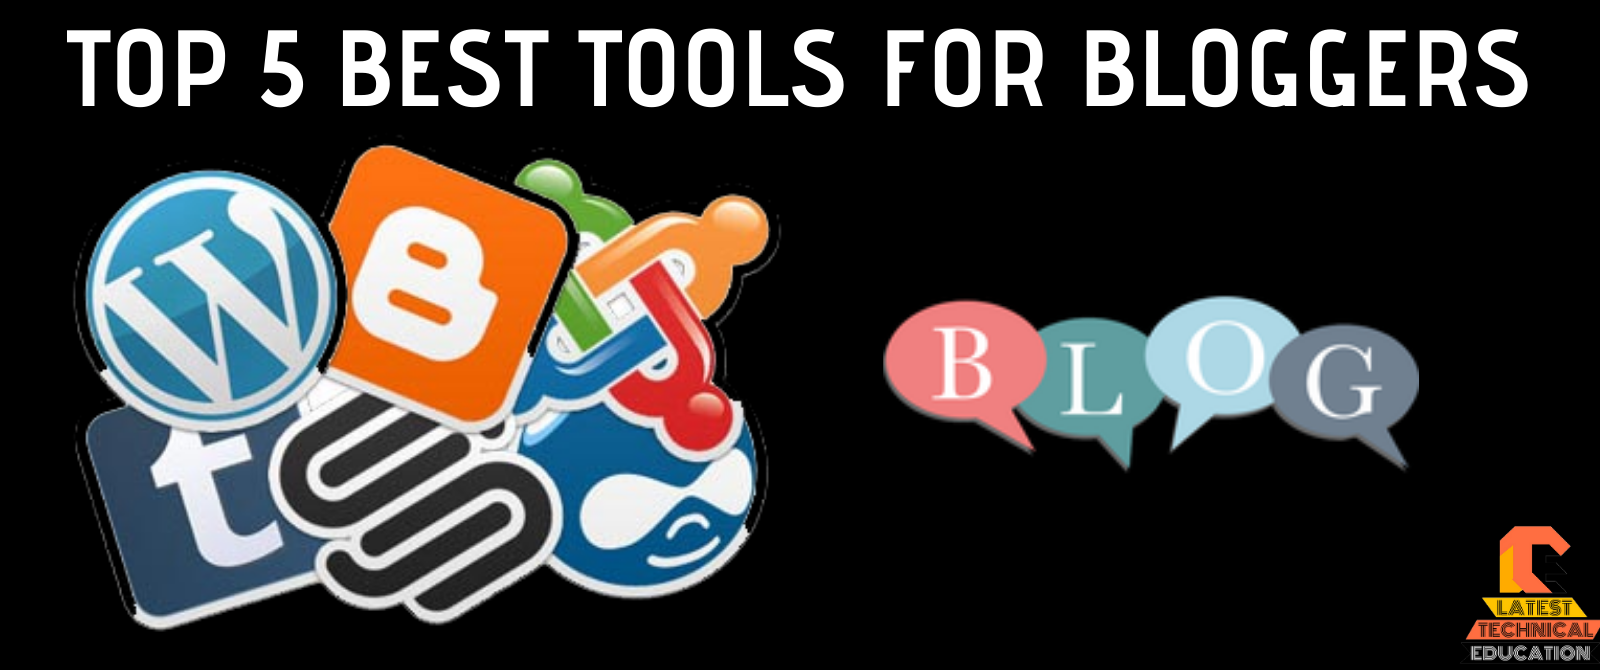 Top 5 Useful Tools For Blogger.